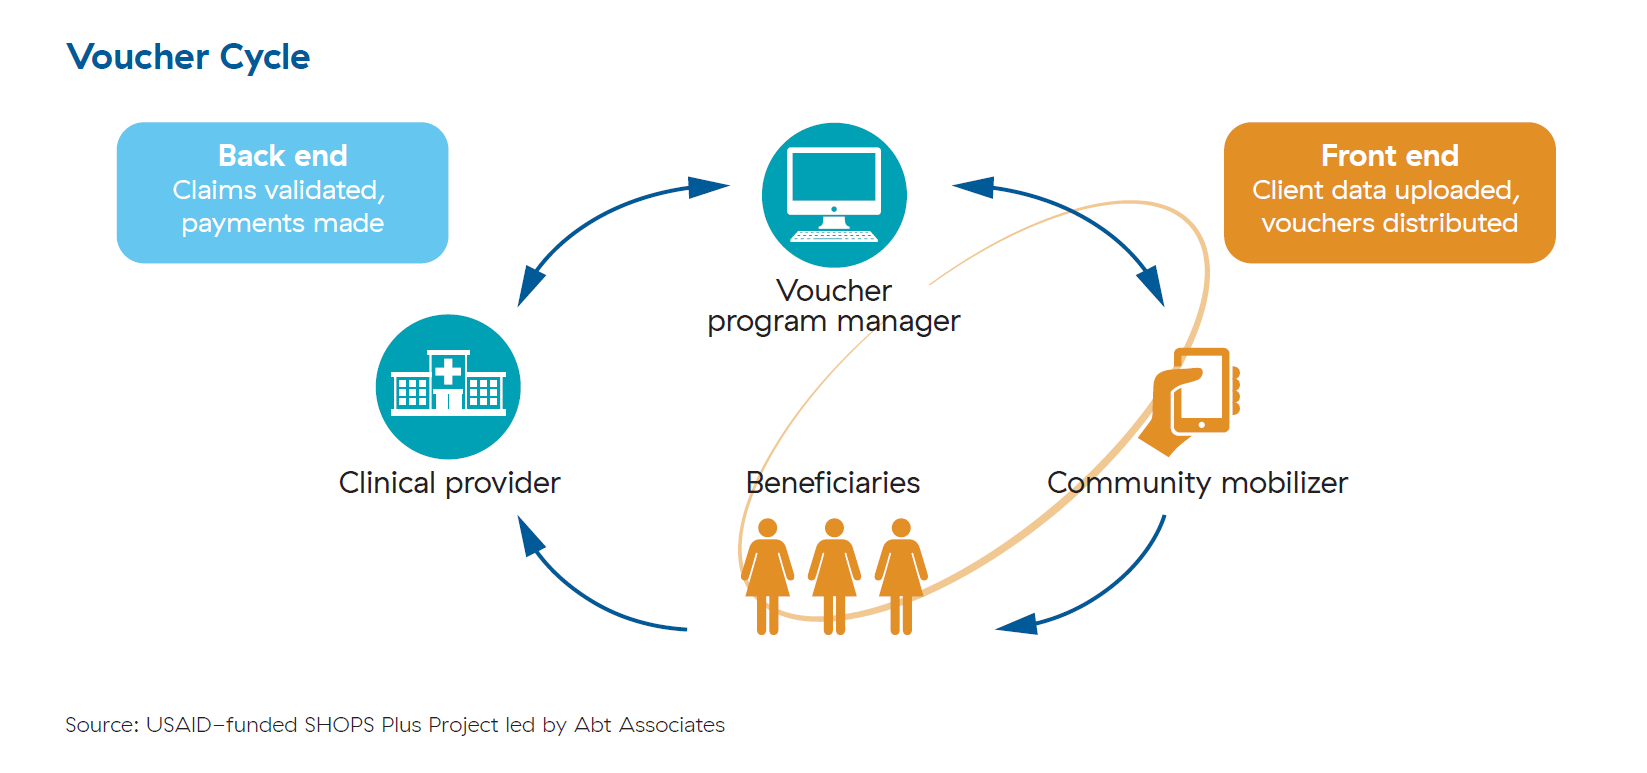 A cyclical process diagram has arrows that connect 4 individuals critical to voucher programs: a voucher program manager, a community mobilizer, beneficiaries, and a clinical provider.